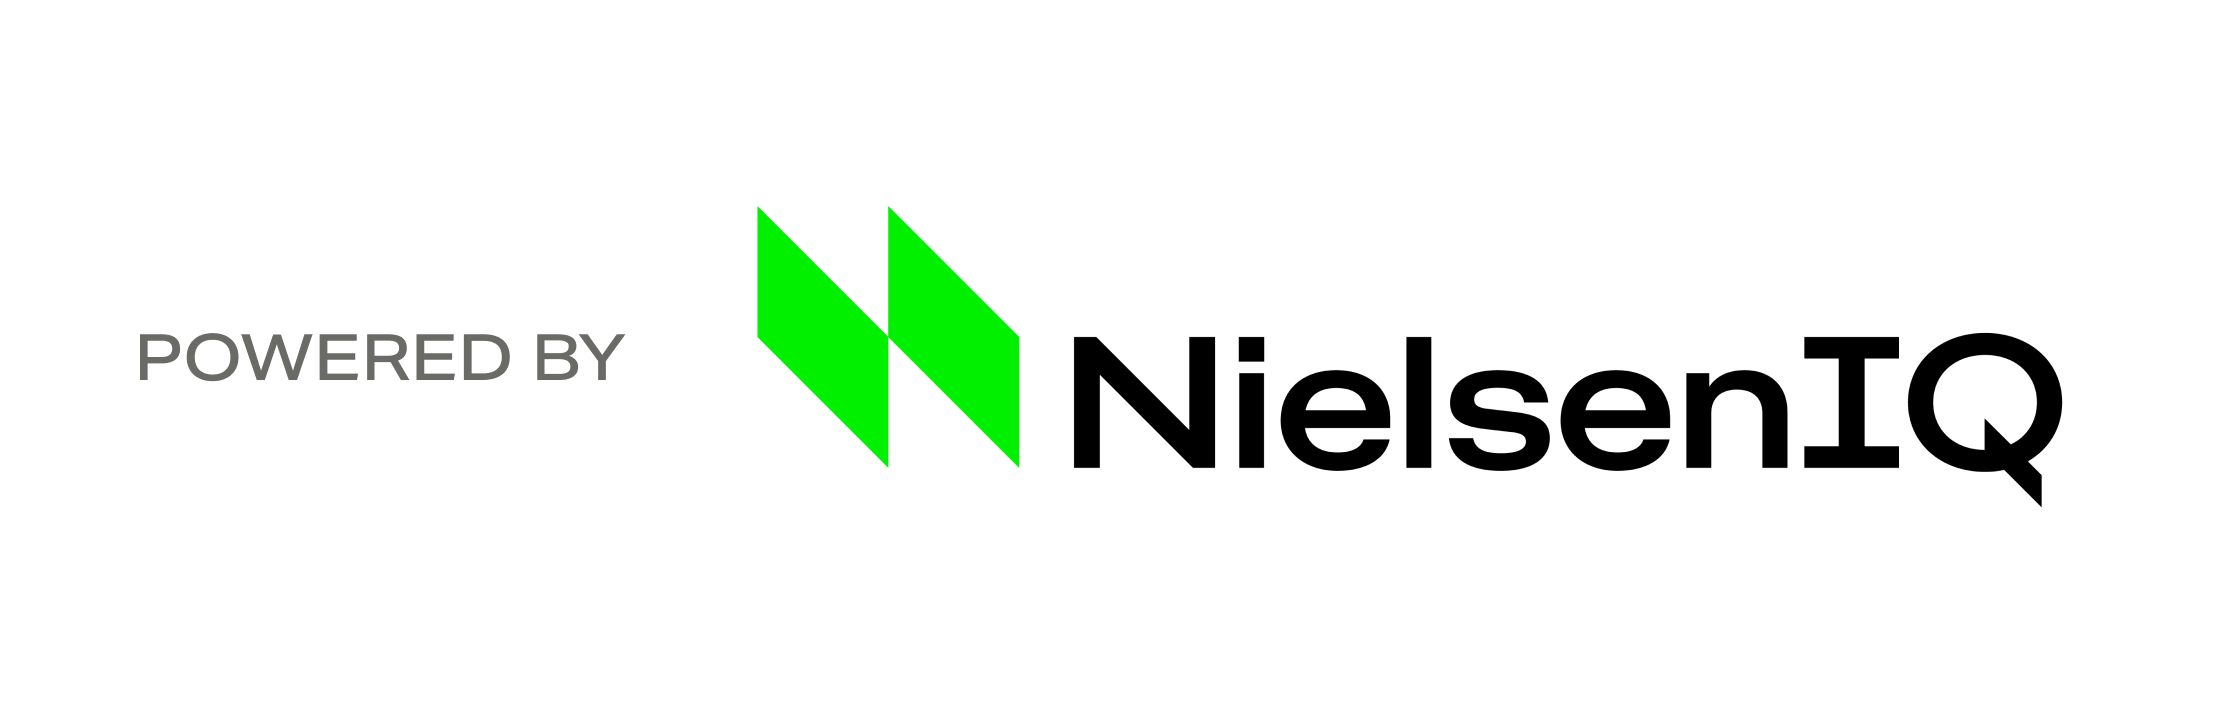 Powered By Nielsen